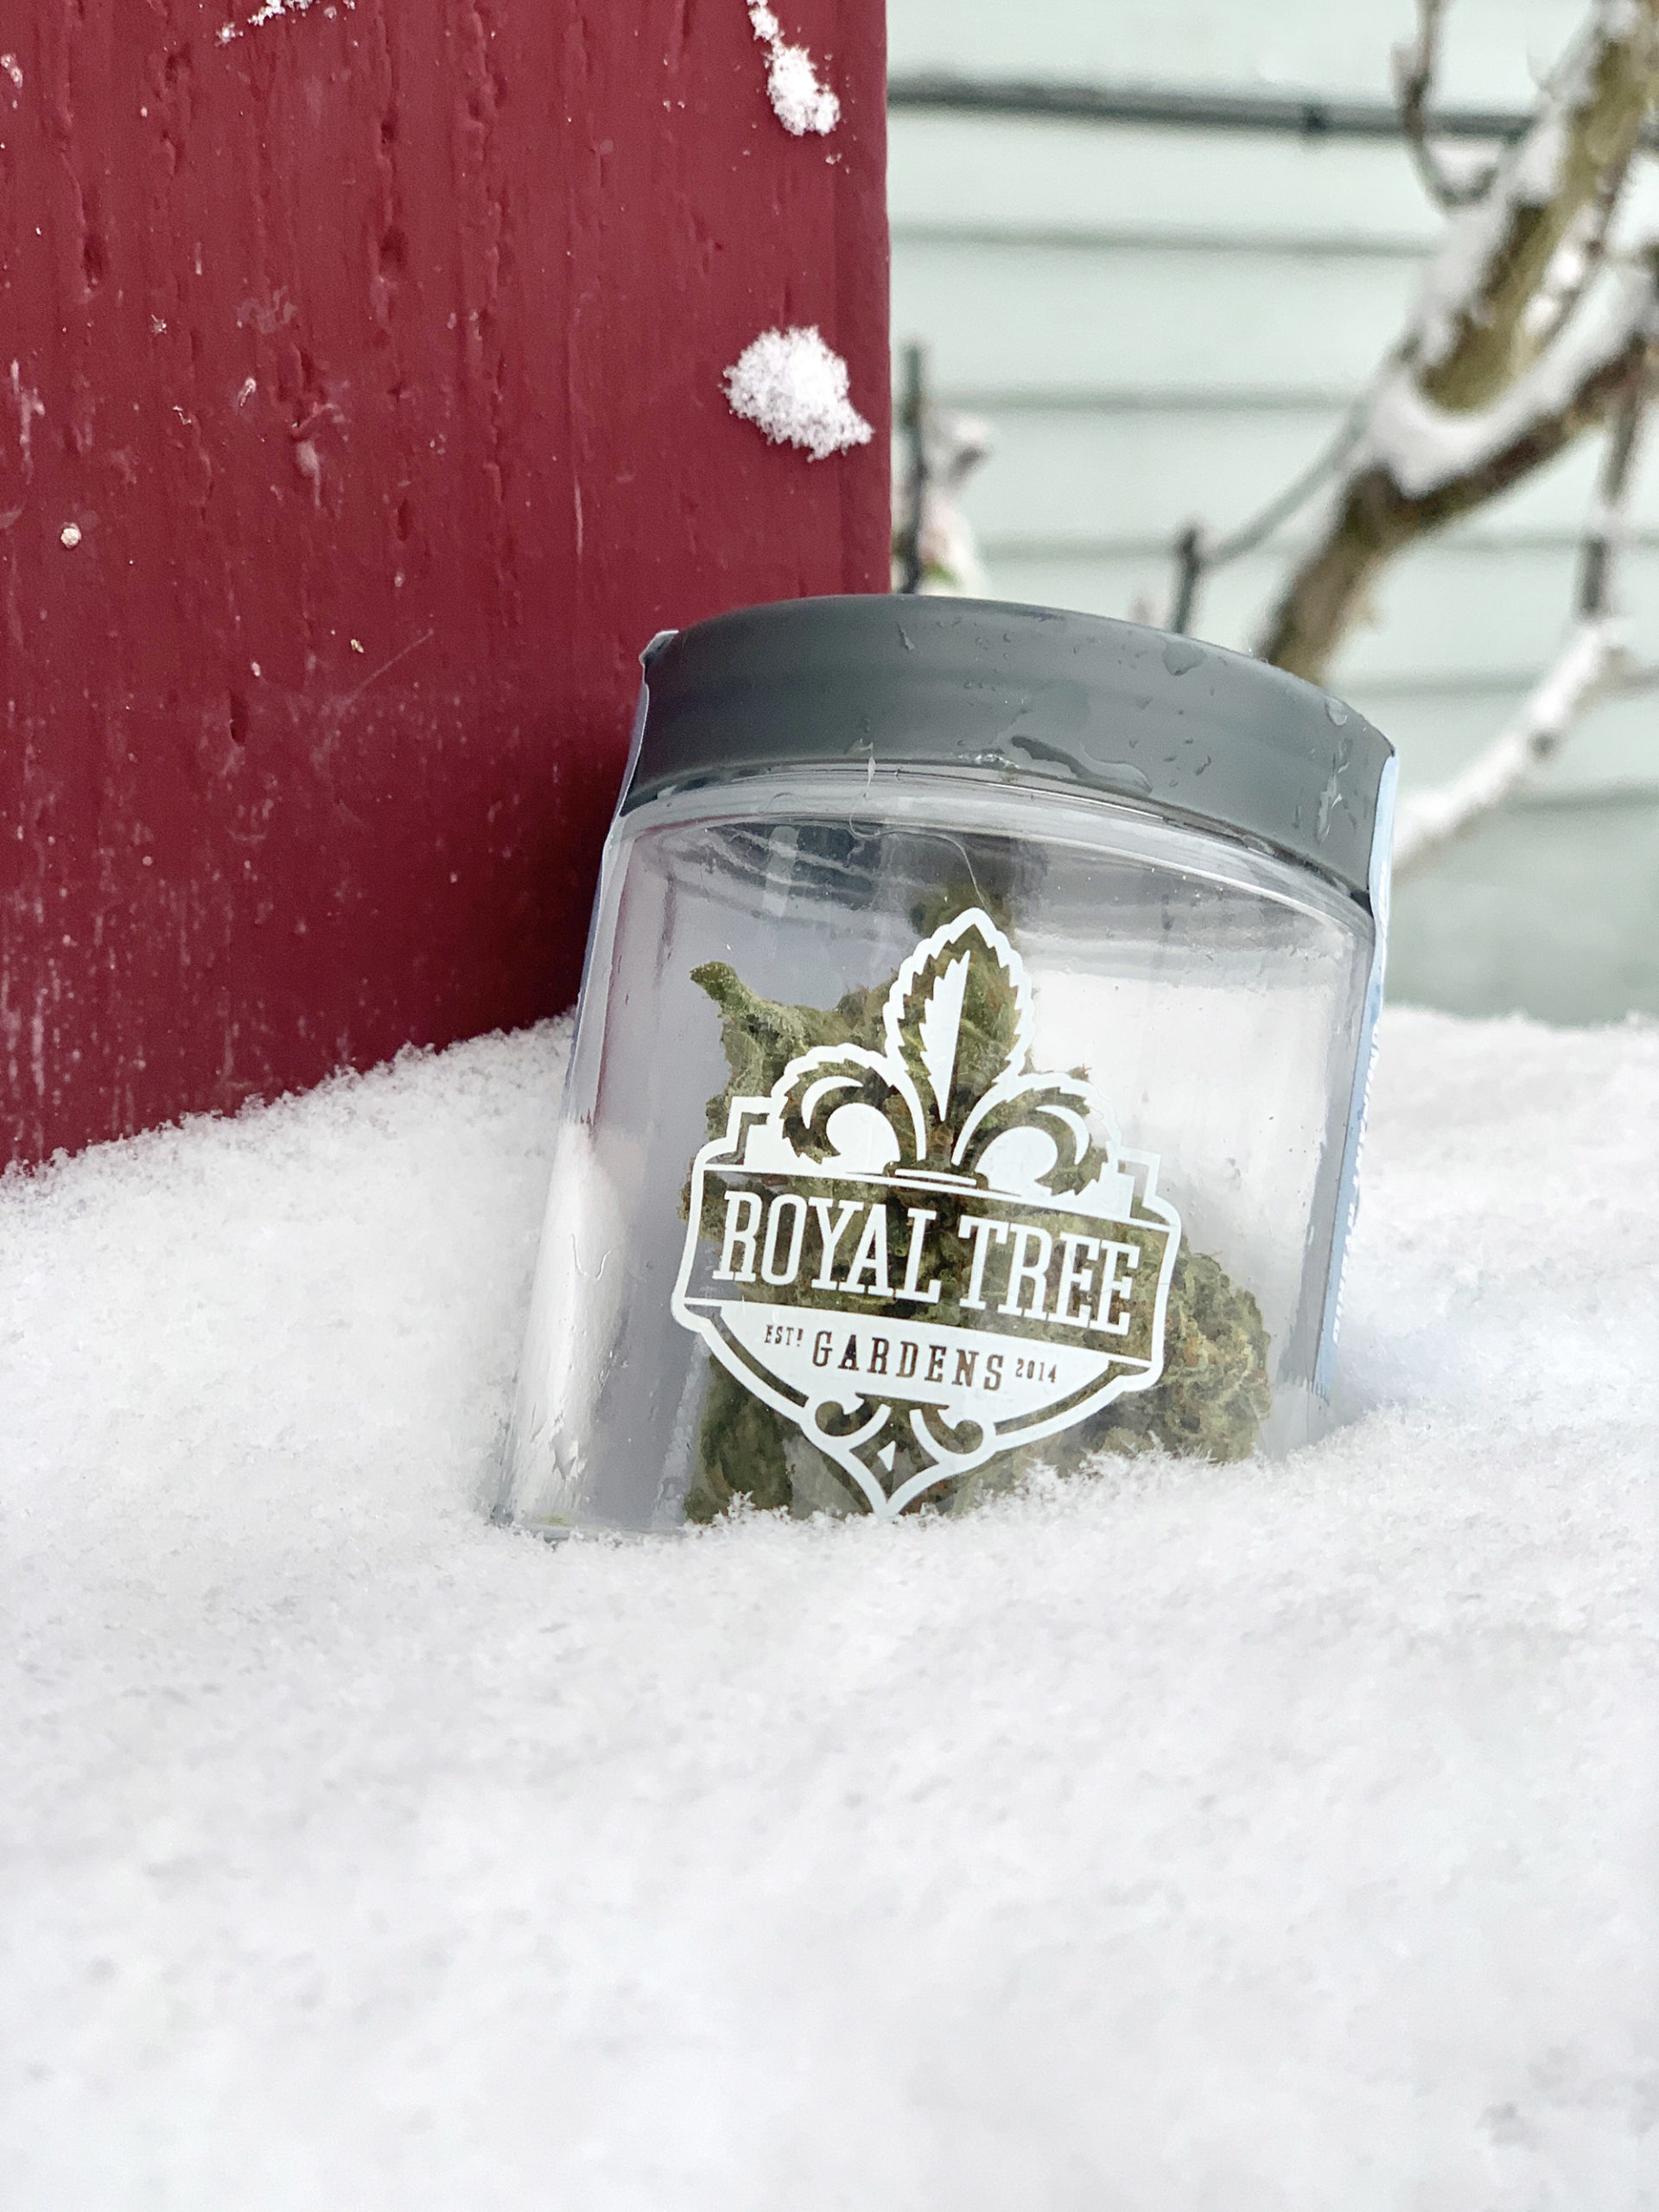 A jar of Royal Tree Gardens set against the snowy outside.